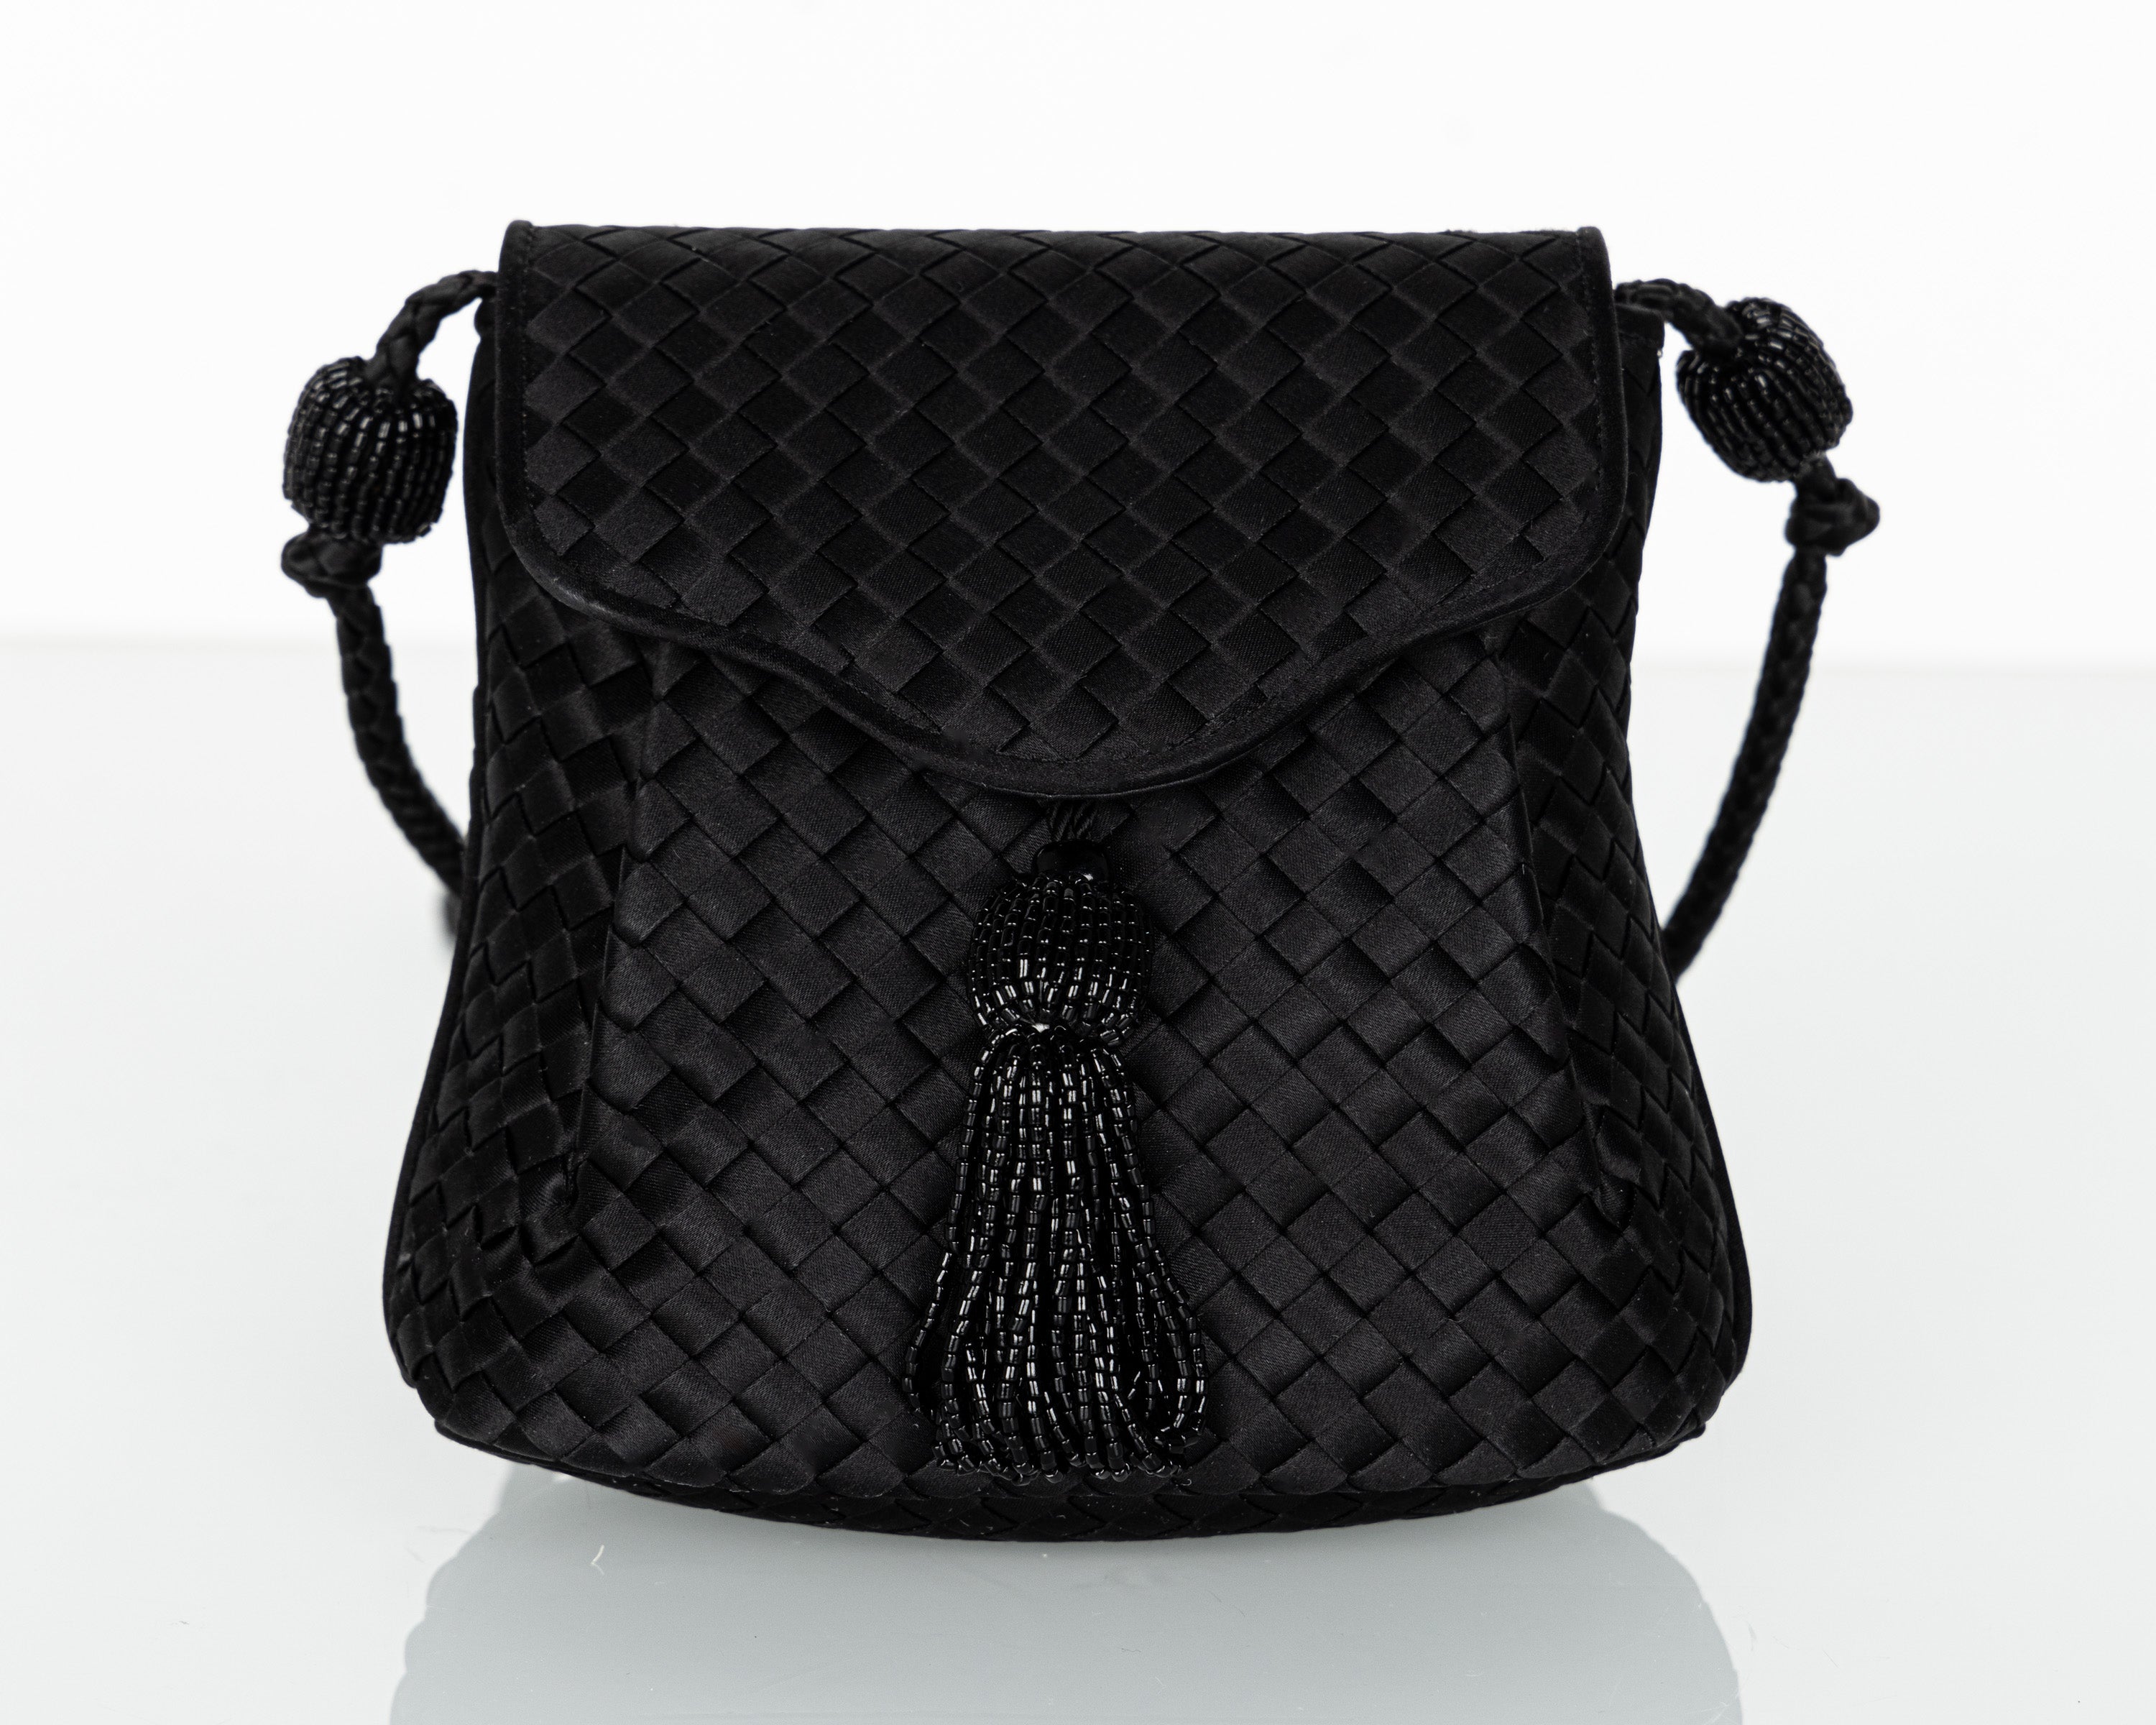 This extraordinary Bottega bag captures the essence of vintage luxury, showcasing the unmatched craftsmanship and attention to detail for which Bottega Veneta is renowned. Crafted from lustrous black satin, this bag features the iconic intrecciato